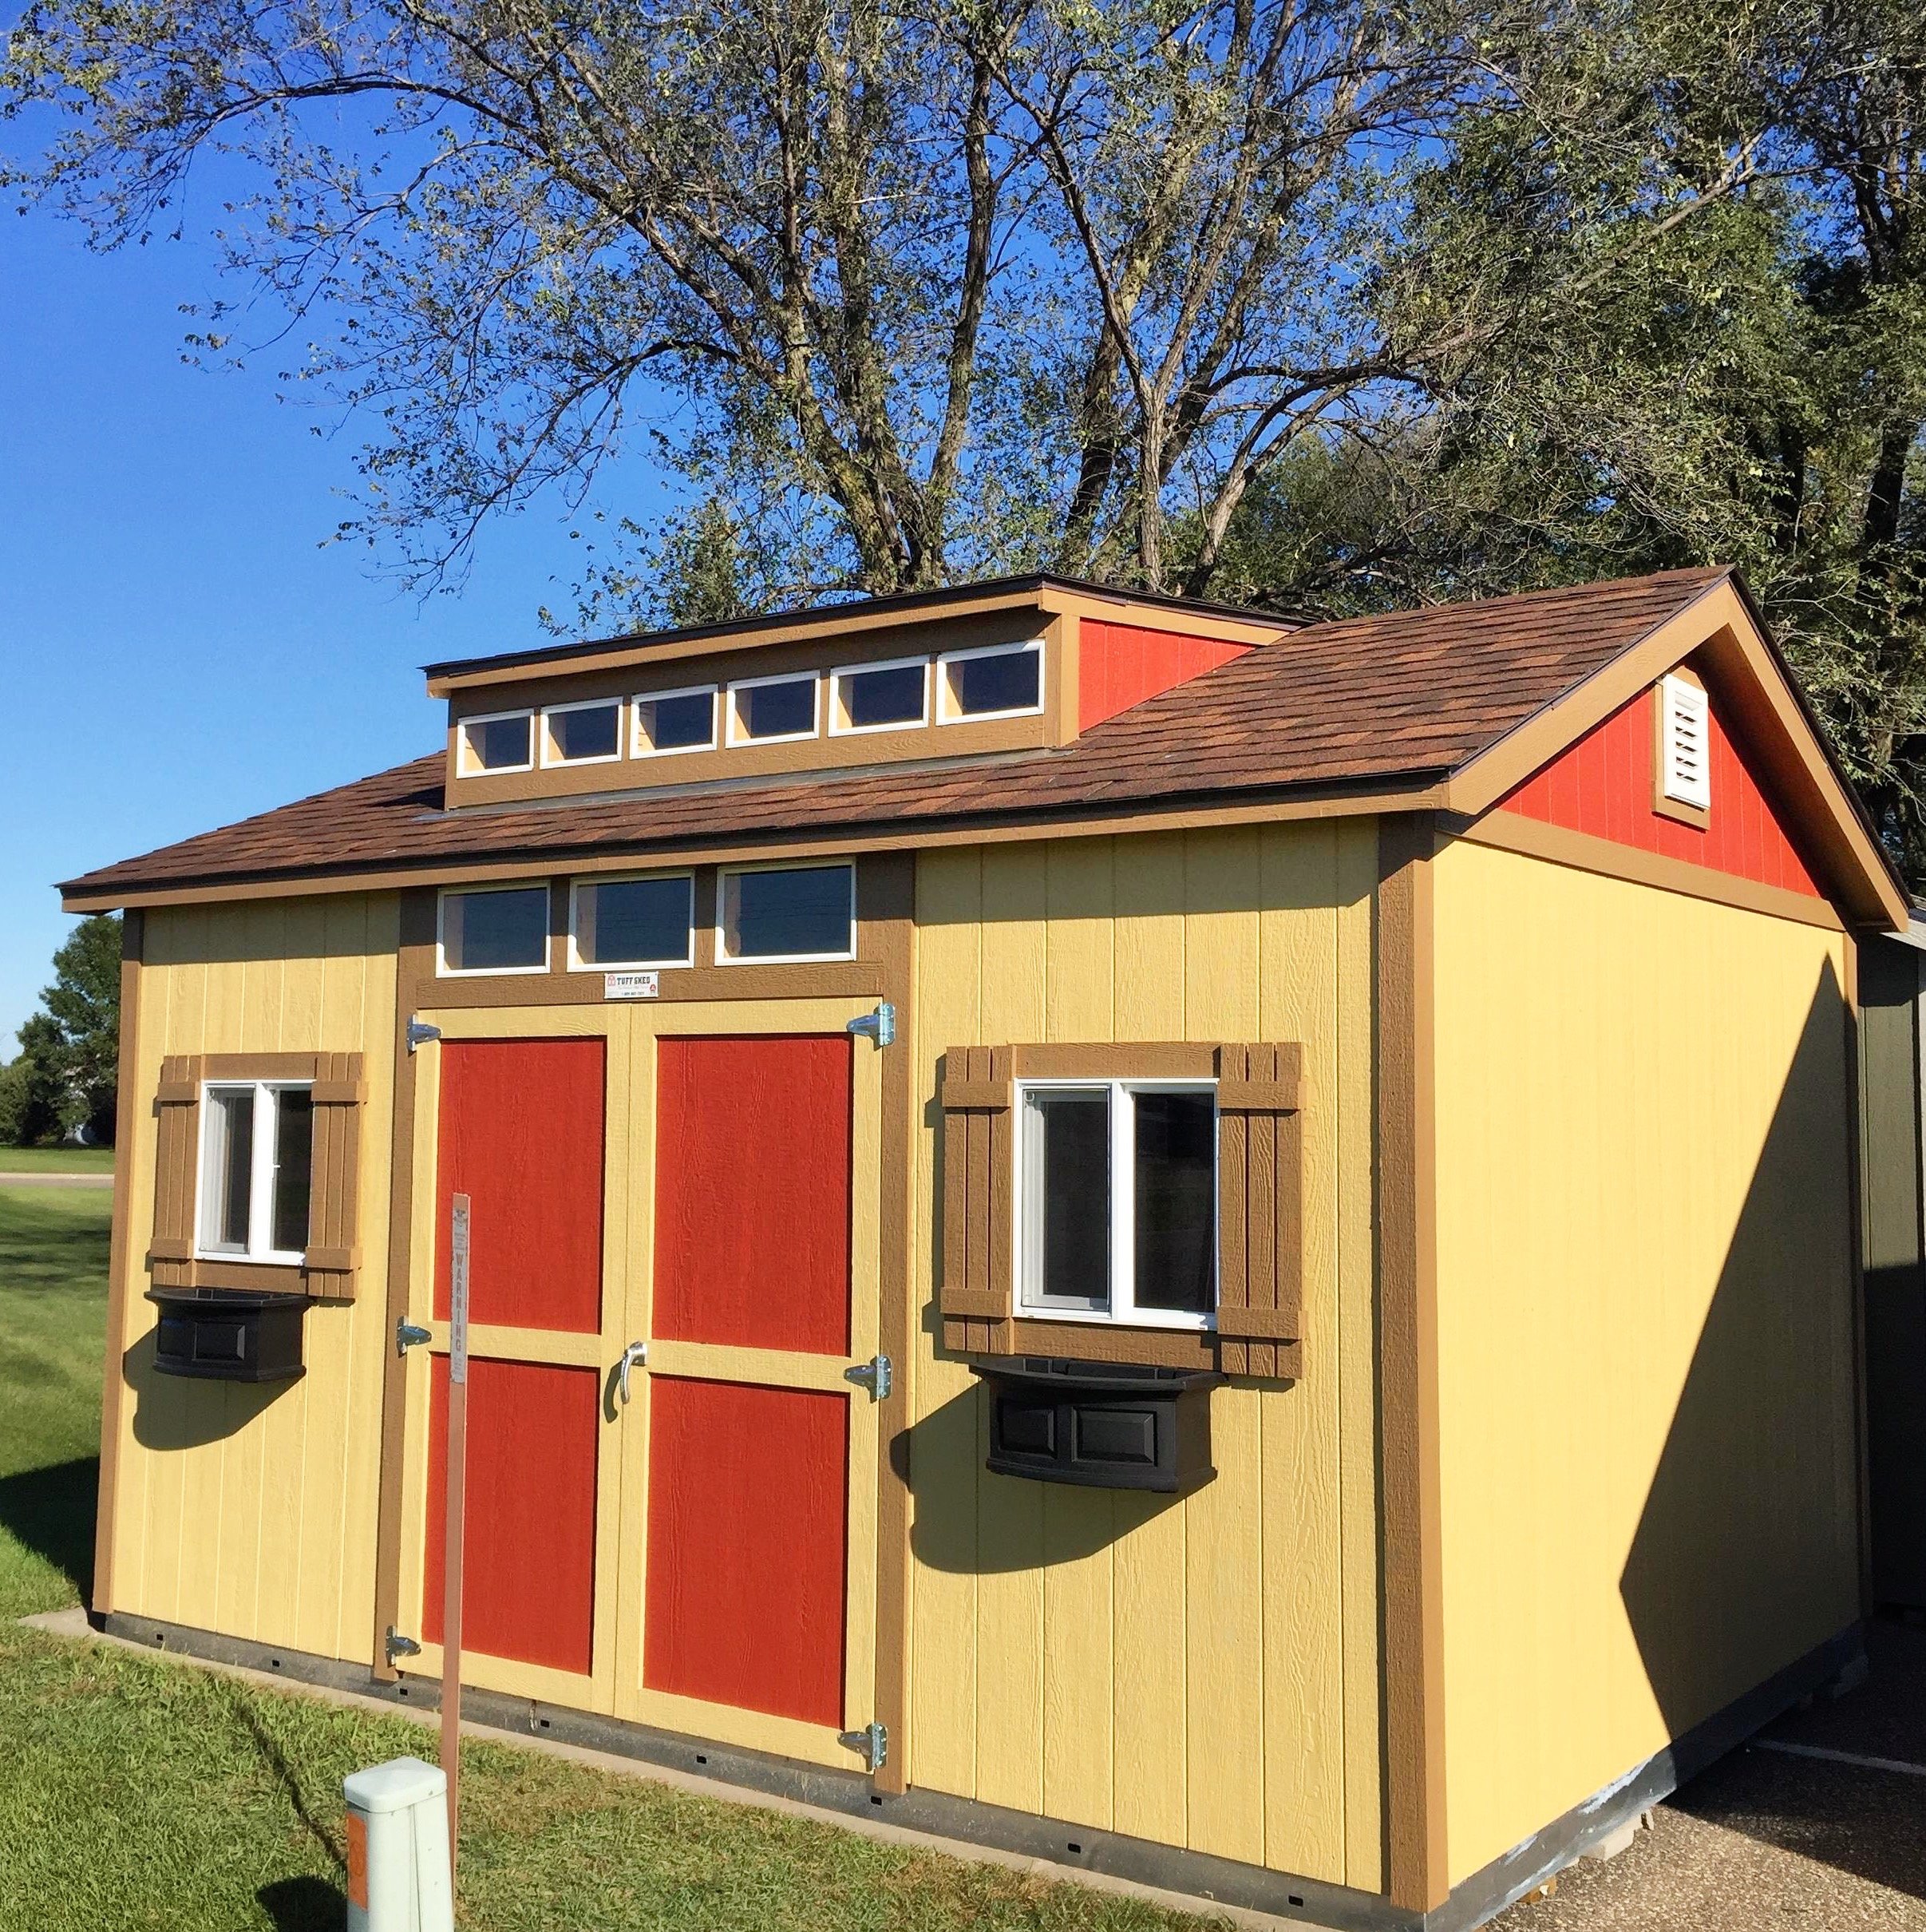 Introducing Our Newest Options - Tuff Shed